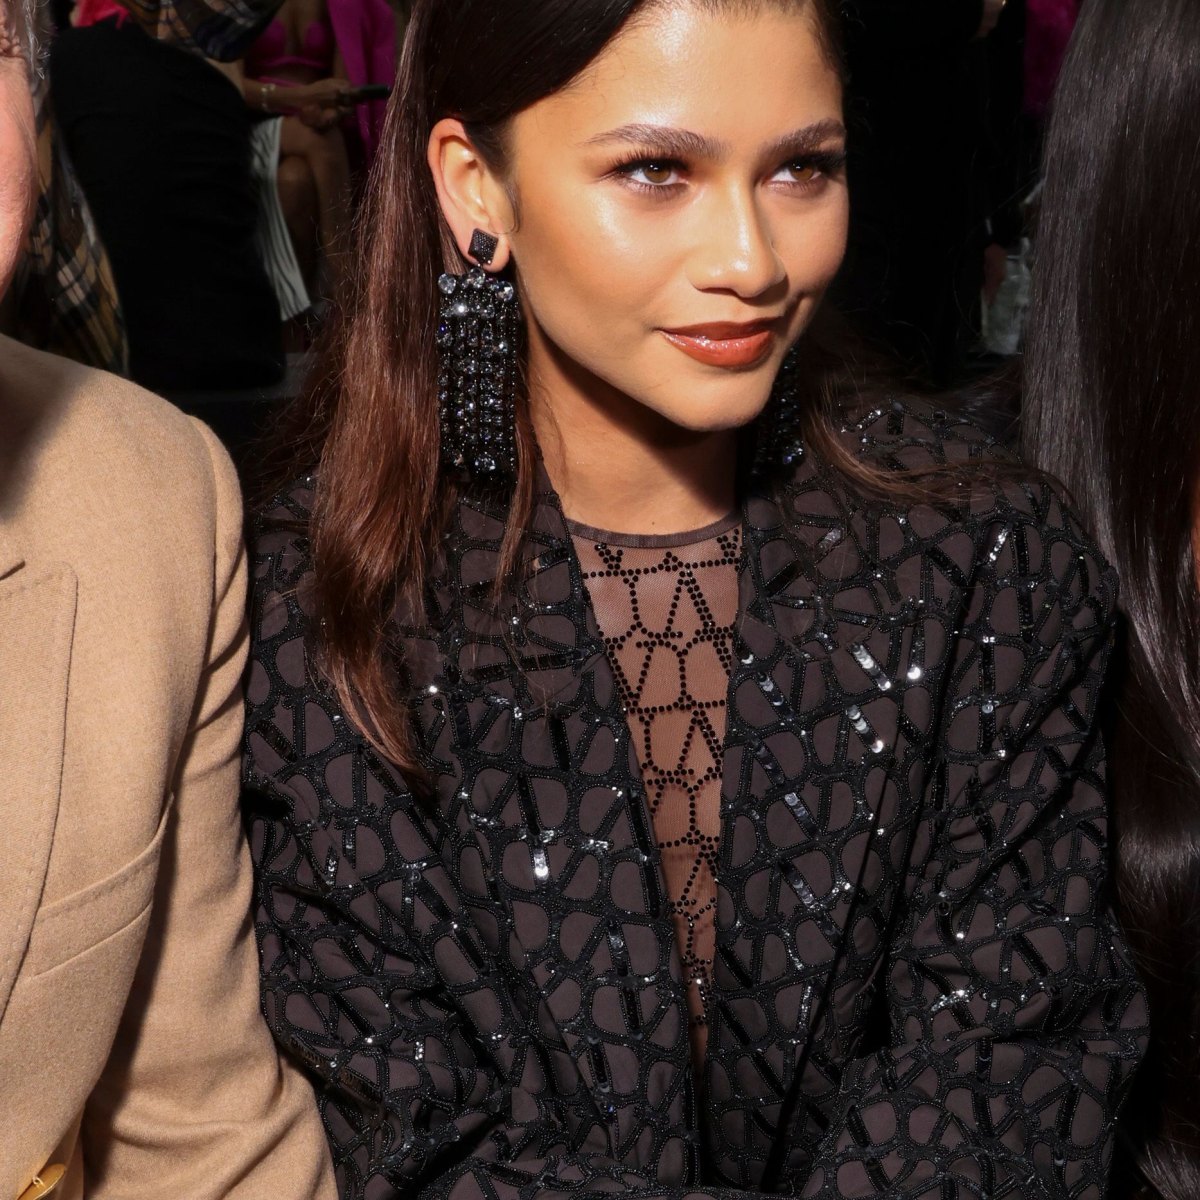 Zendaya Heads To New York Fashion Week From L.A.: Photo 774238, Zendaya  Pictures